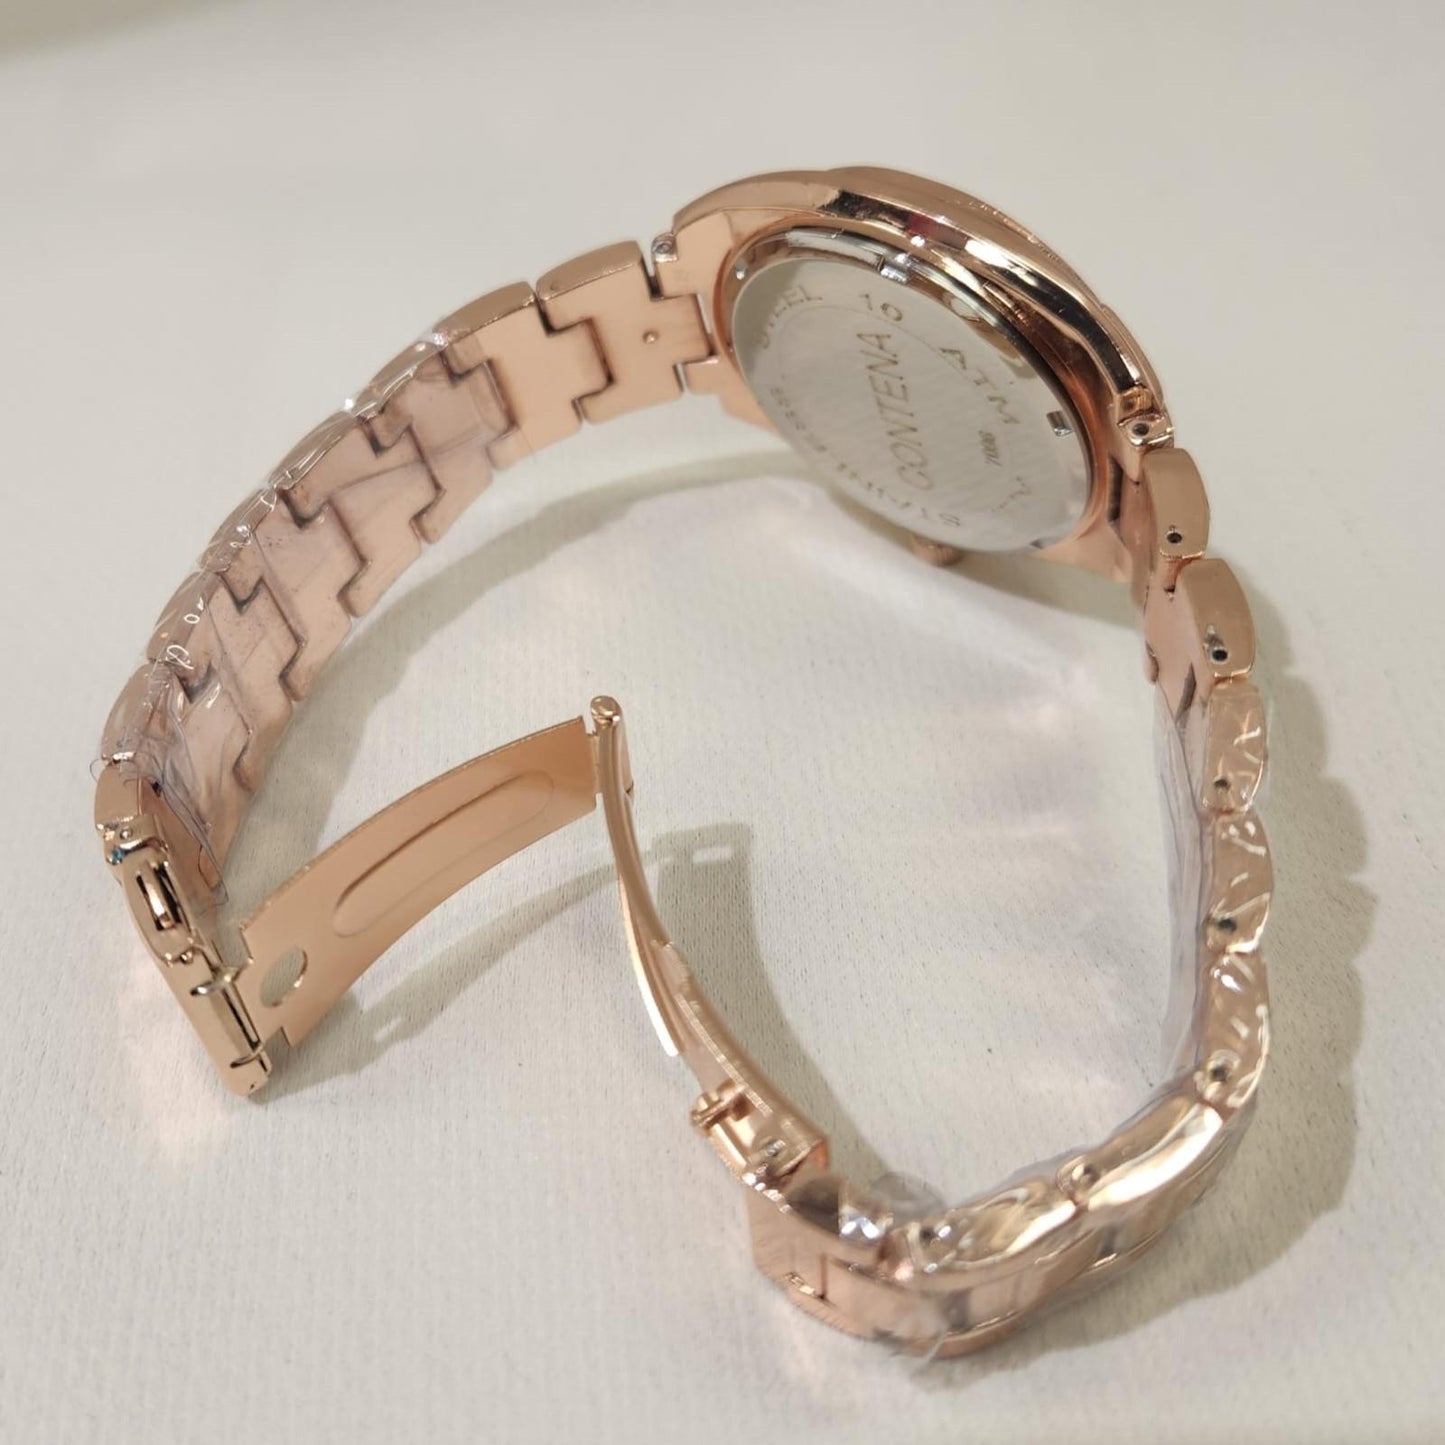 Clasp closure of rose gold wristwatch for women